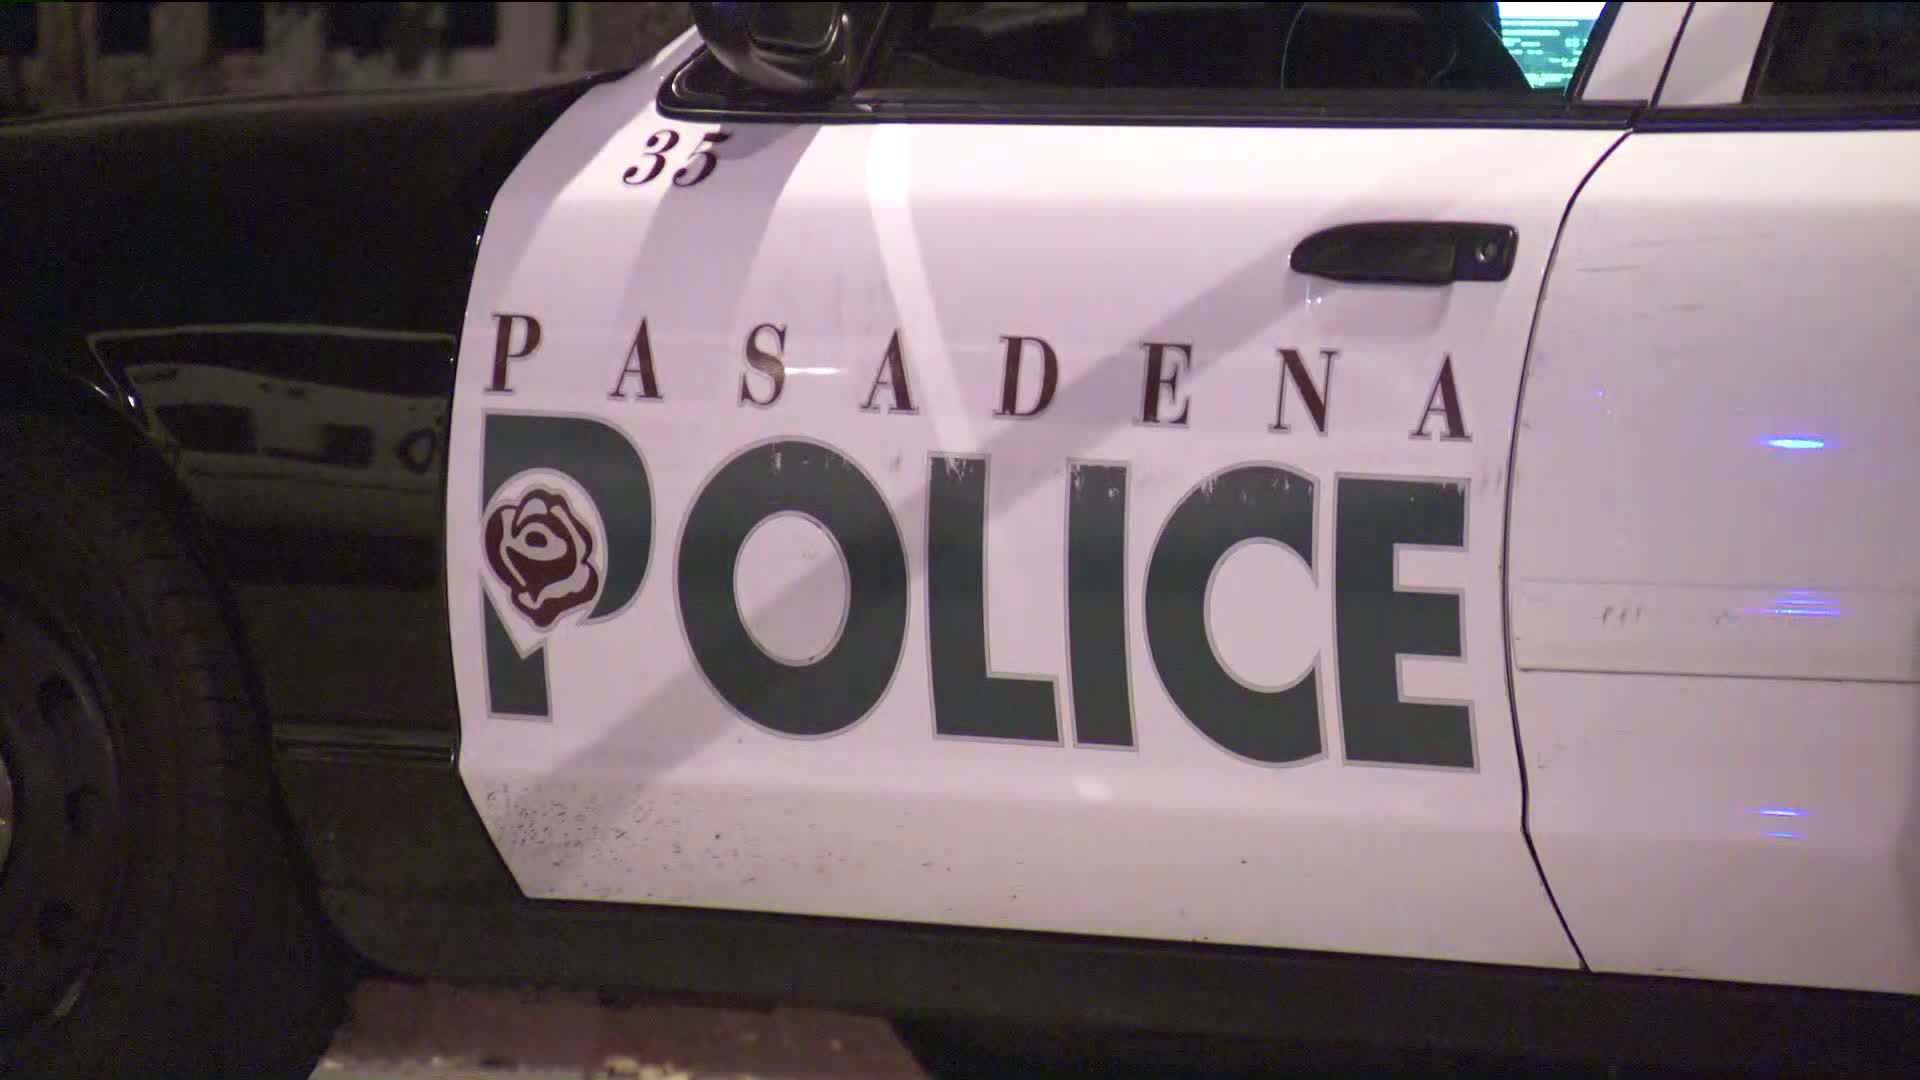 A Pasadena police cruiser is seen in a file photo from Jan. 11, 2019. (Credit: KTLA)